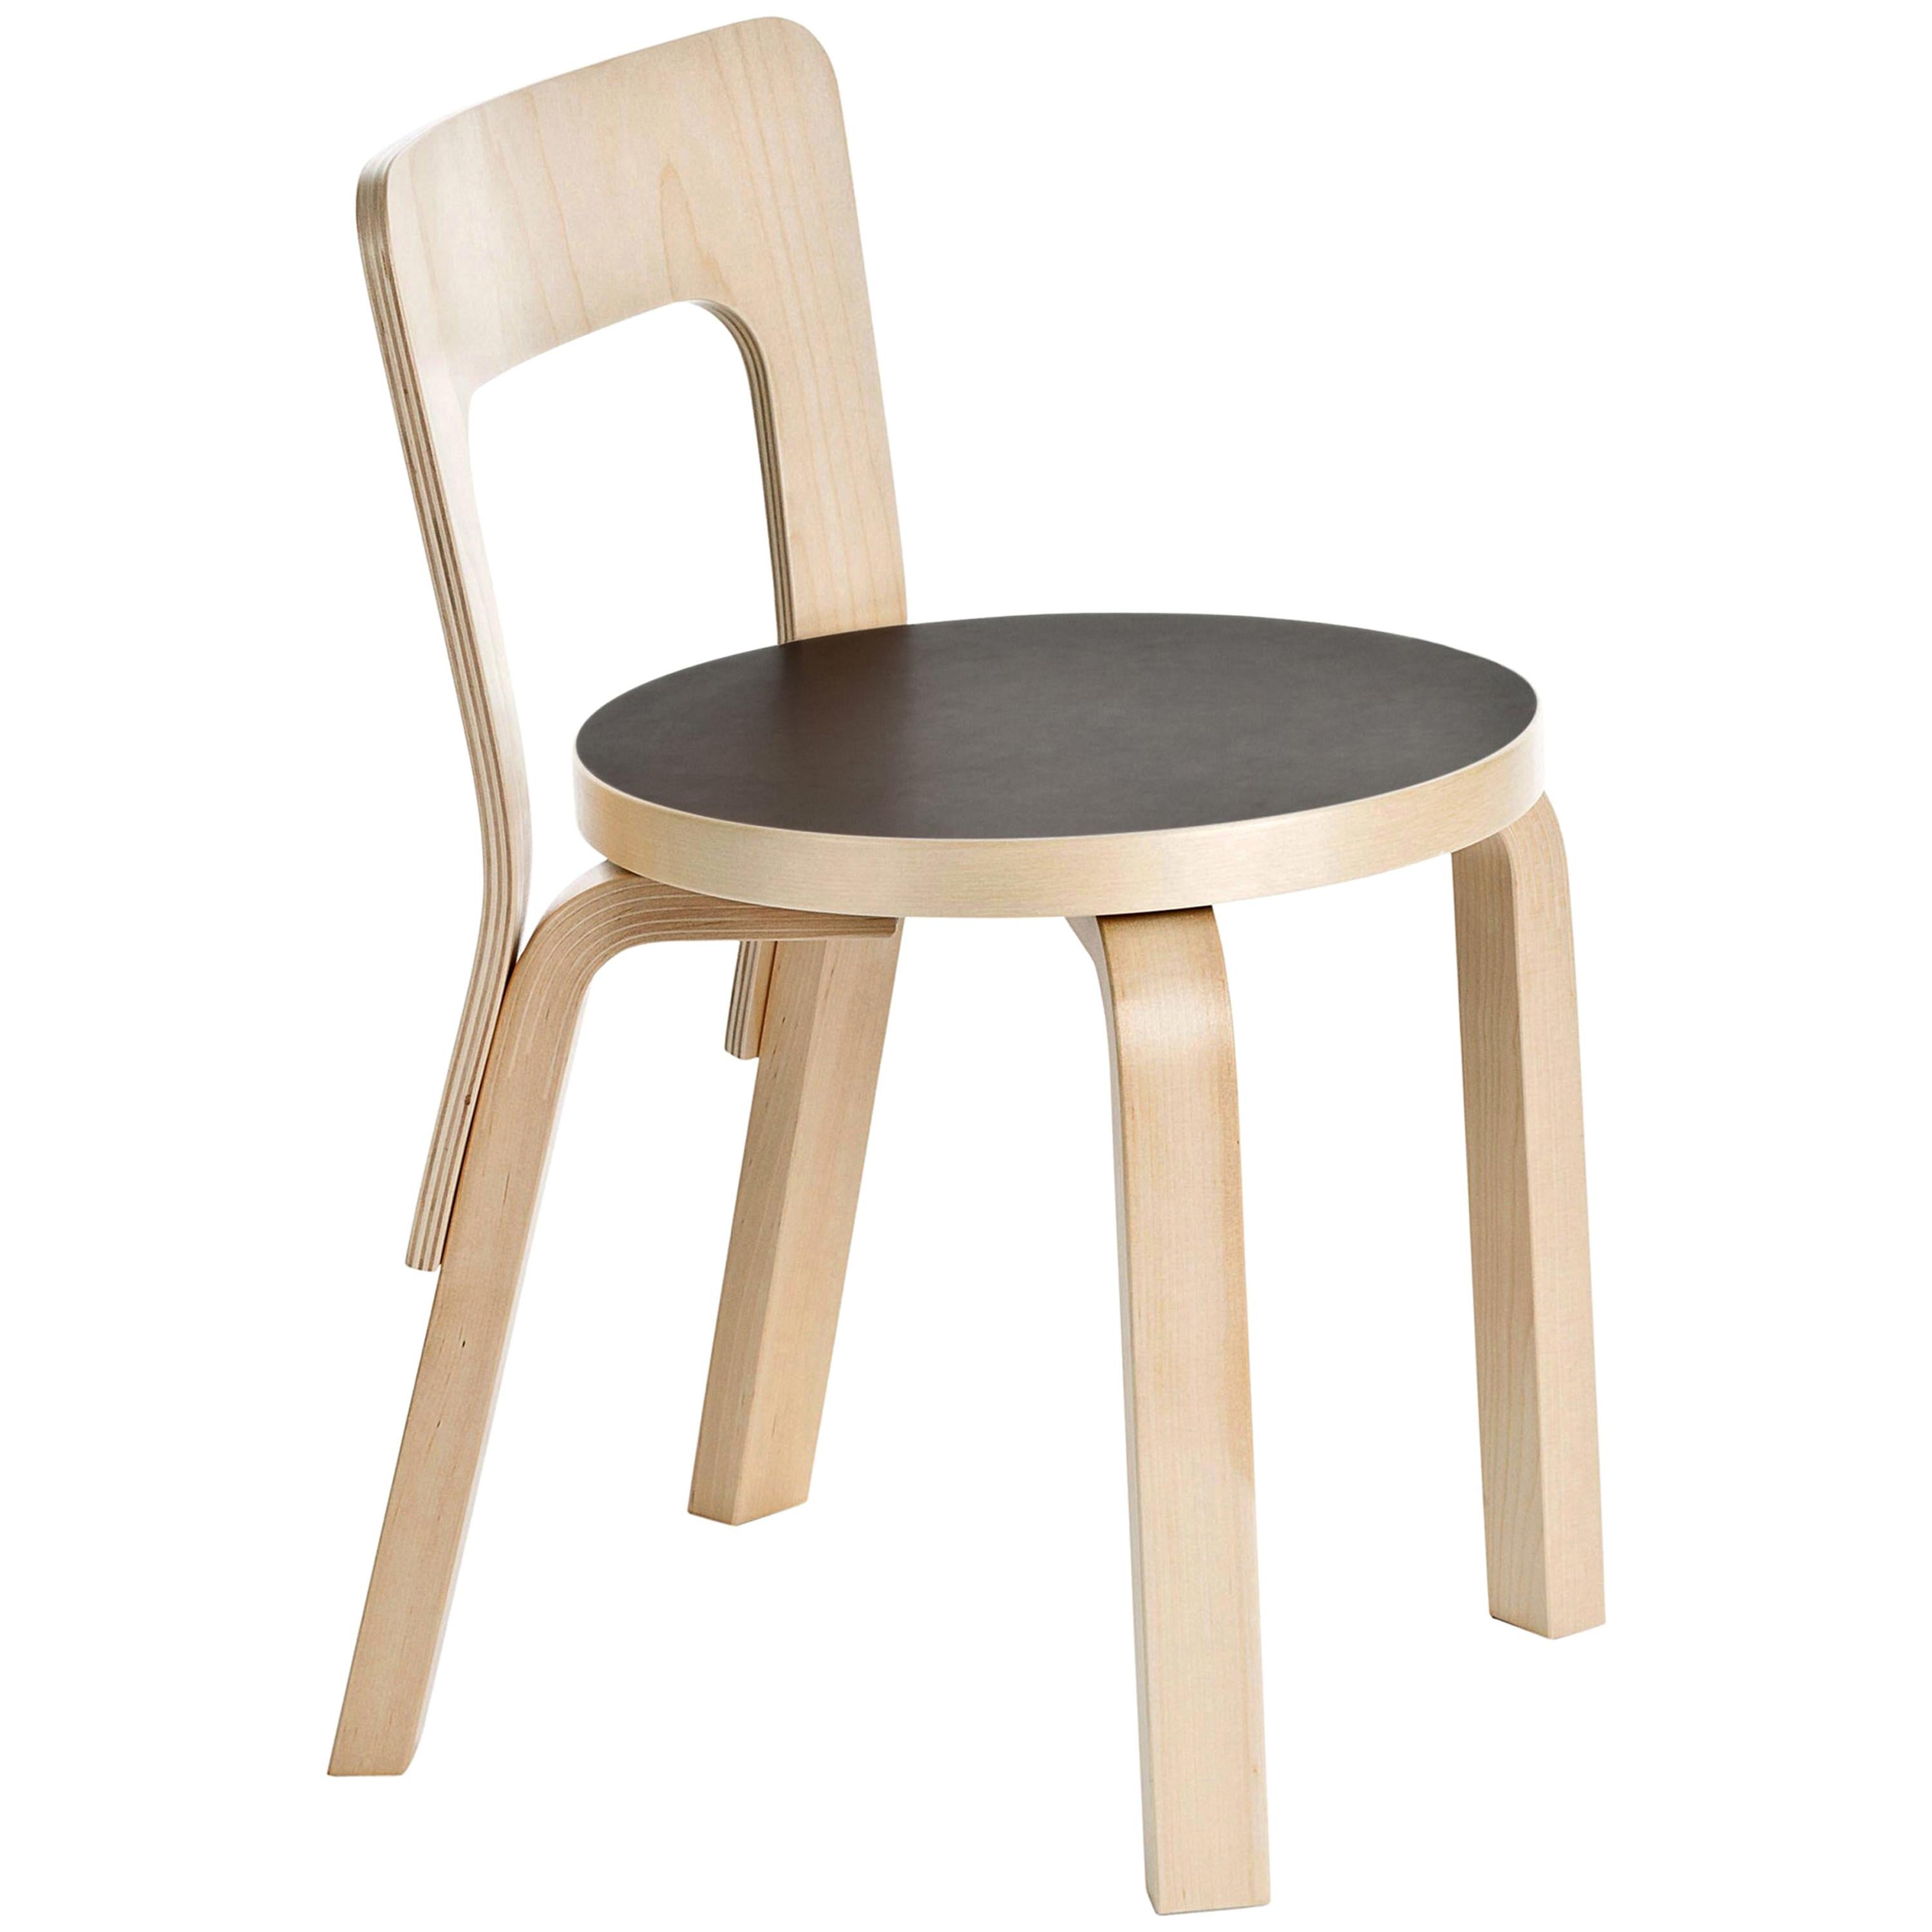 N65 Children's Chair in Lacquered Birch and Black Linoleum by Alvar Aalto For Sale